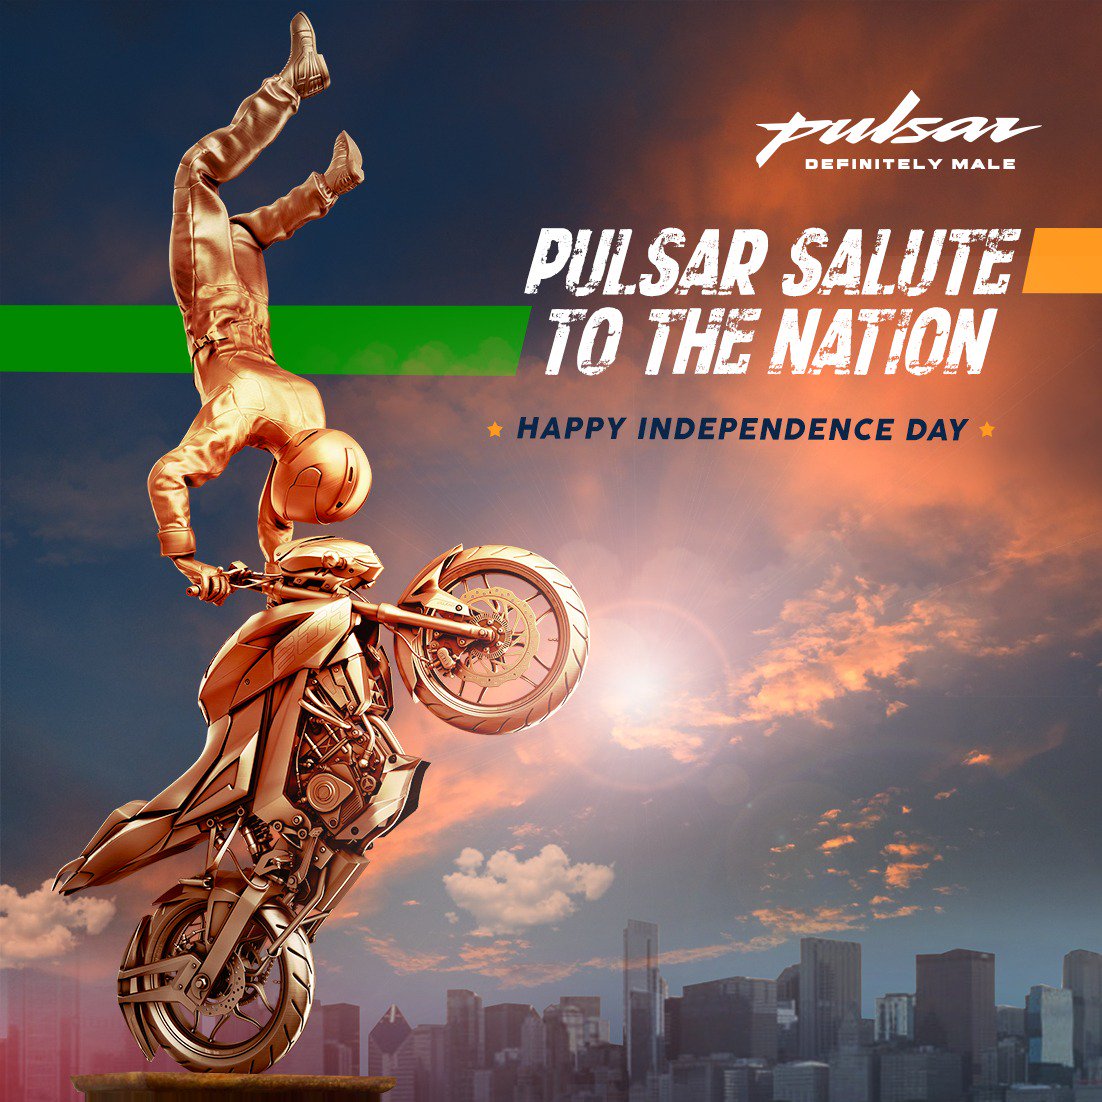 One Passion. One Tribe. One Nation. Happy Independence Day! #IndependenceDayIndia #IndiaIndependenceDay #72